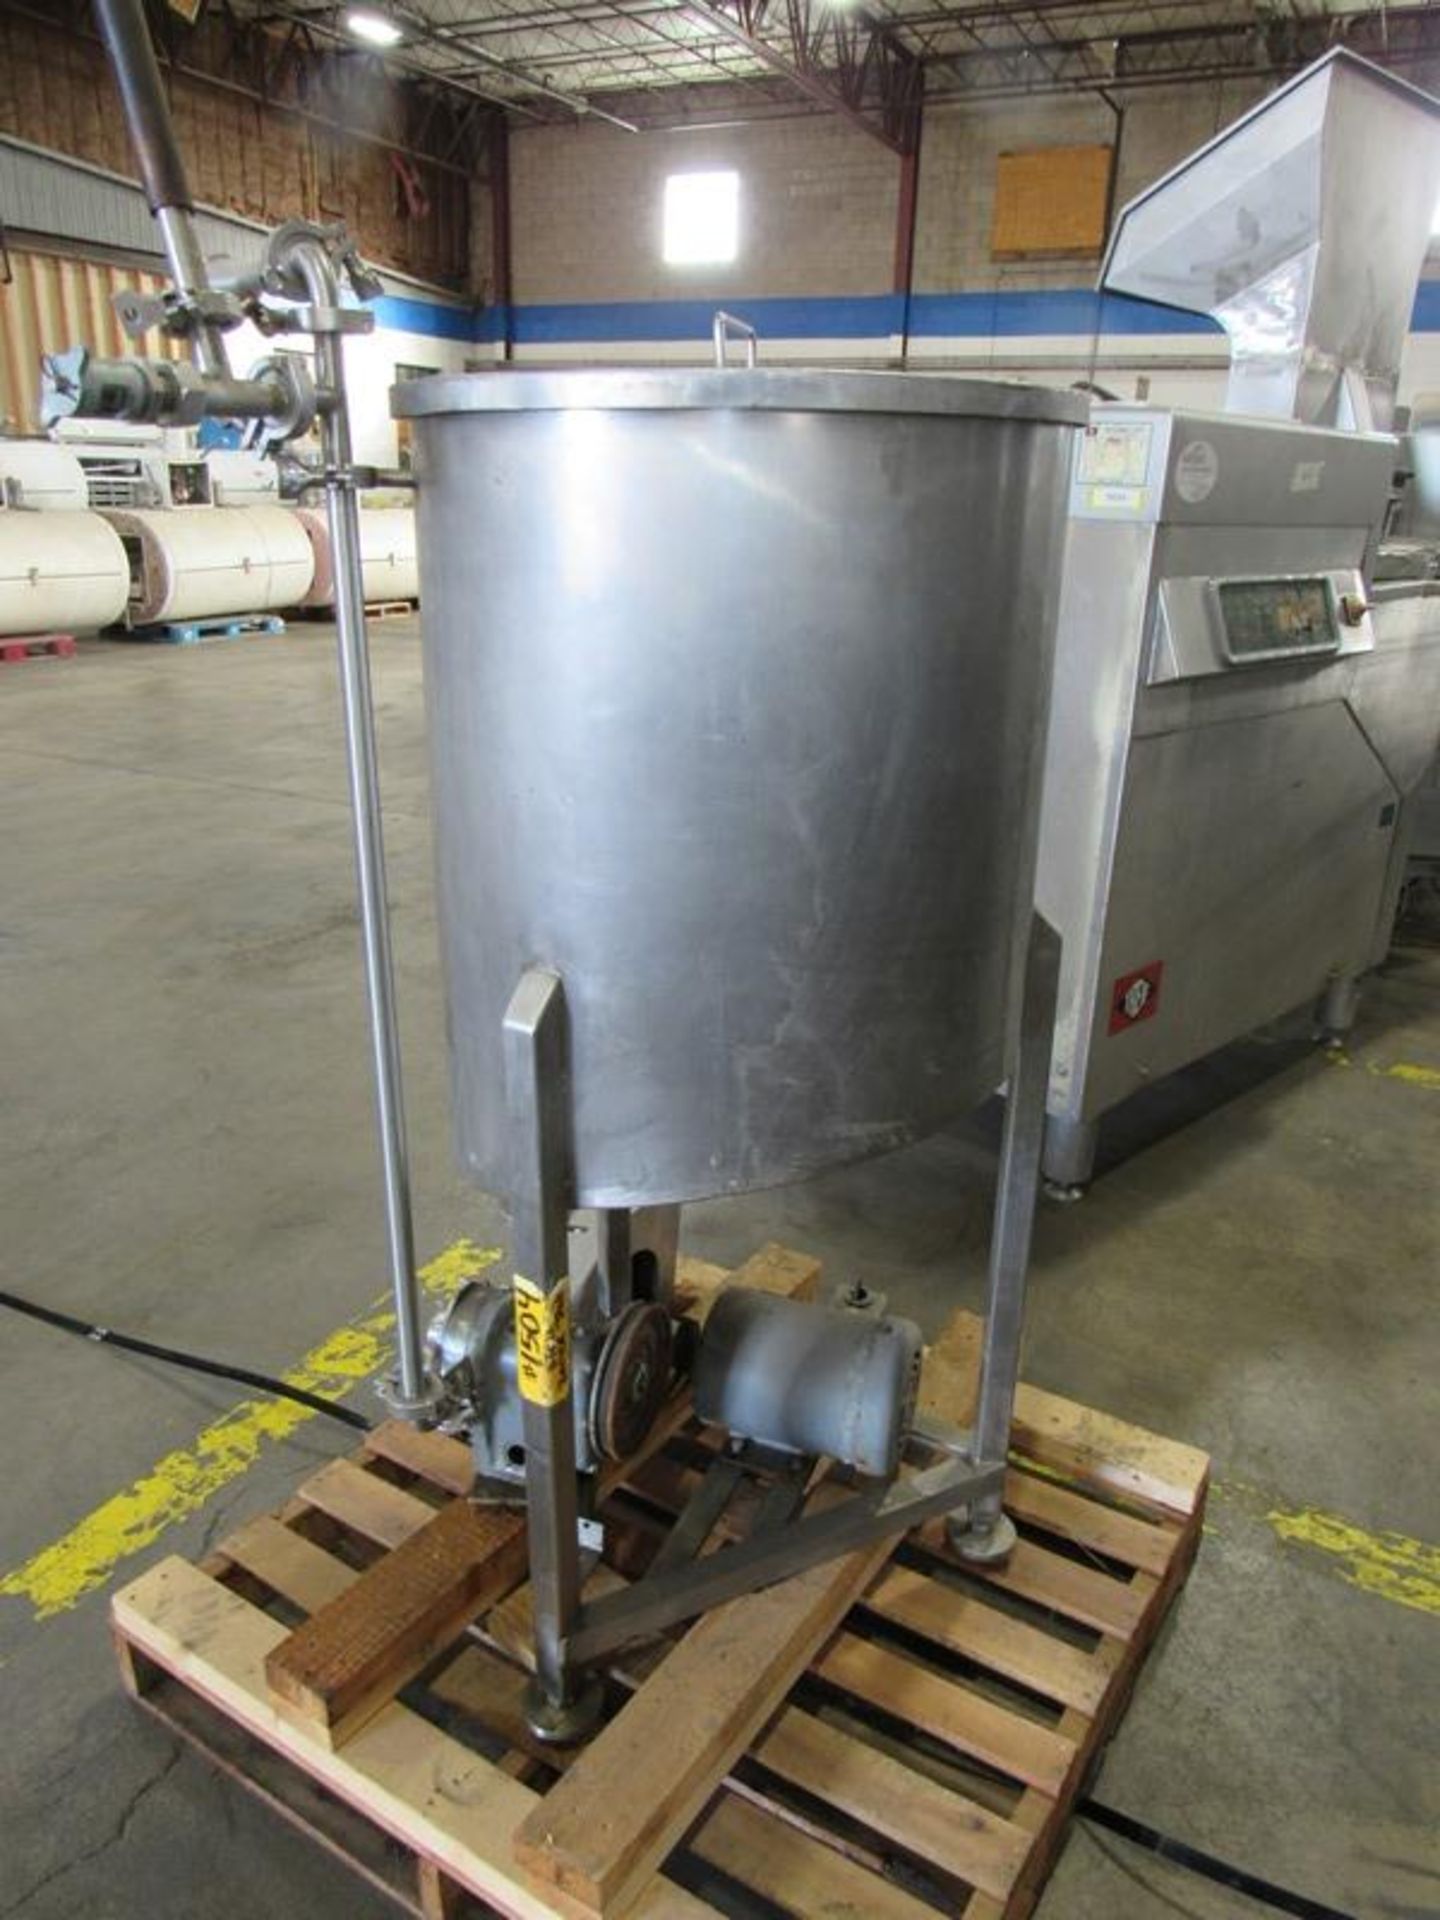 Stainless Steel Tank, 24" dia. X 25" deep, slanted bottom with pump, size 10, Ser. #076748SS, 1/2